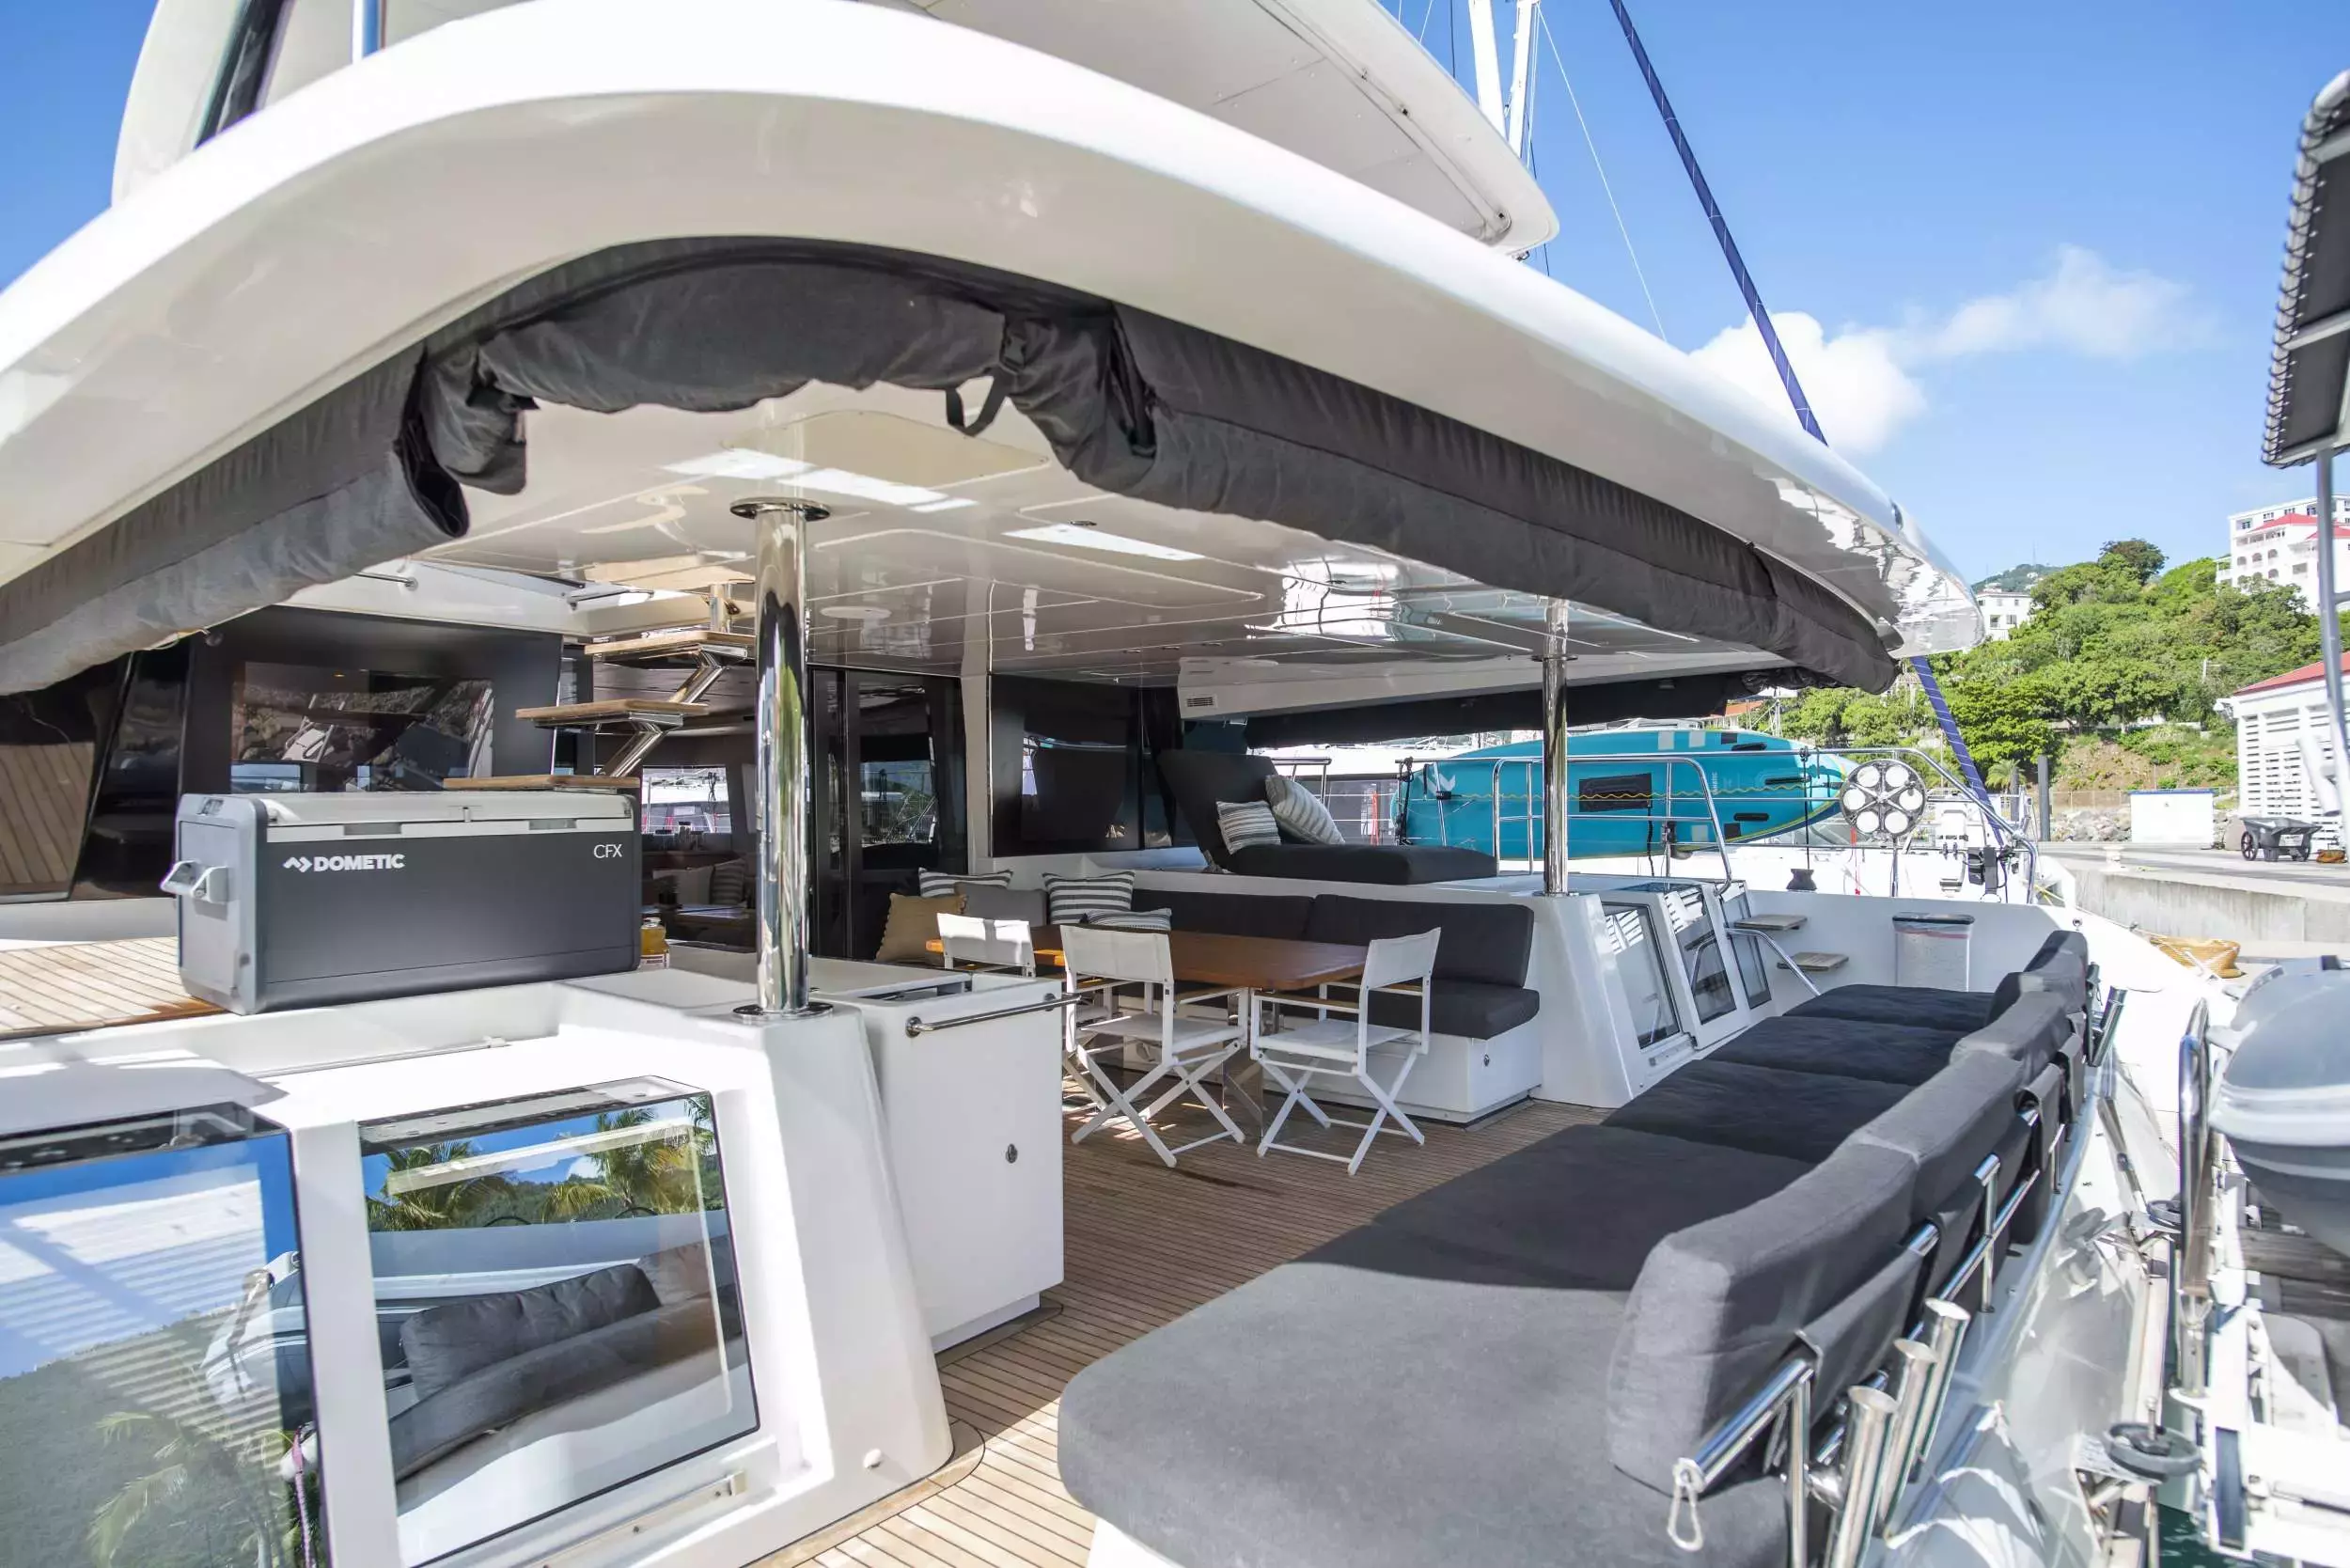 Colette by Lagoon - Top rates for a Rental of a private Power Catamaran in Puerto Rico